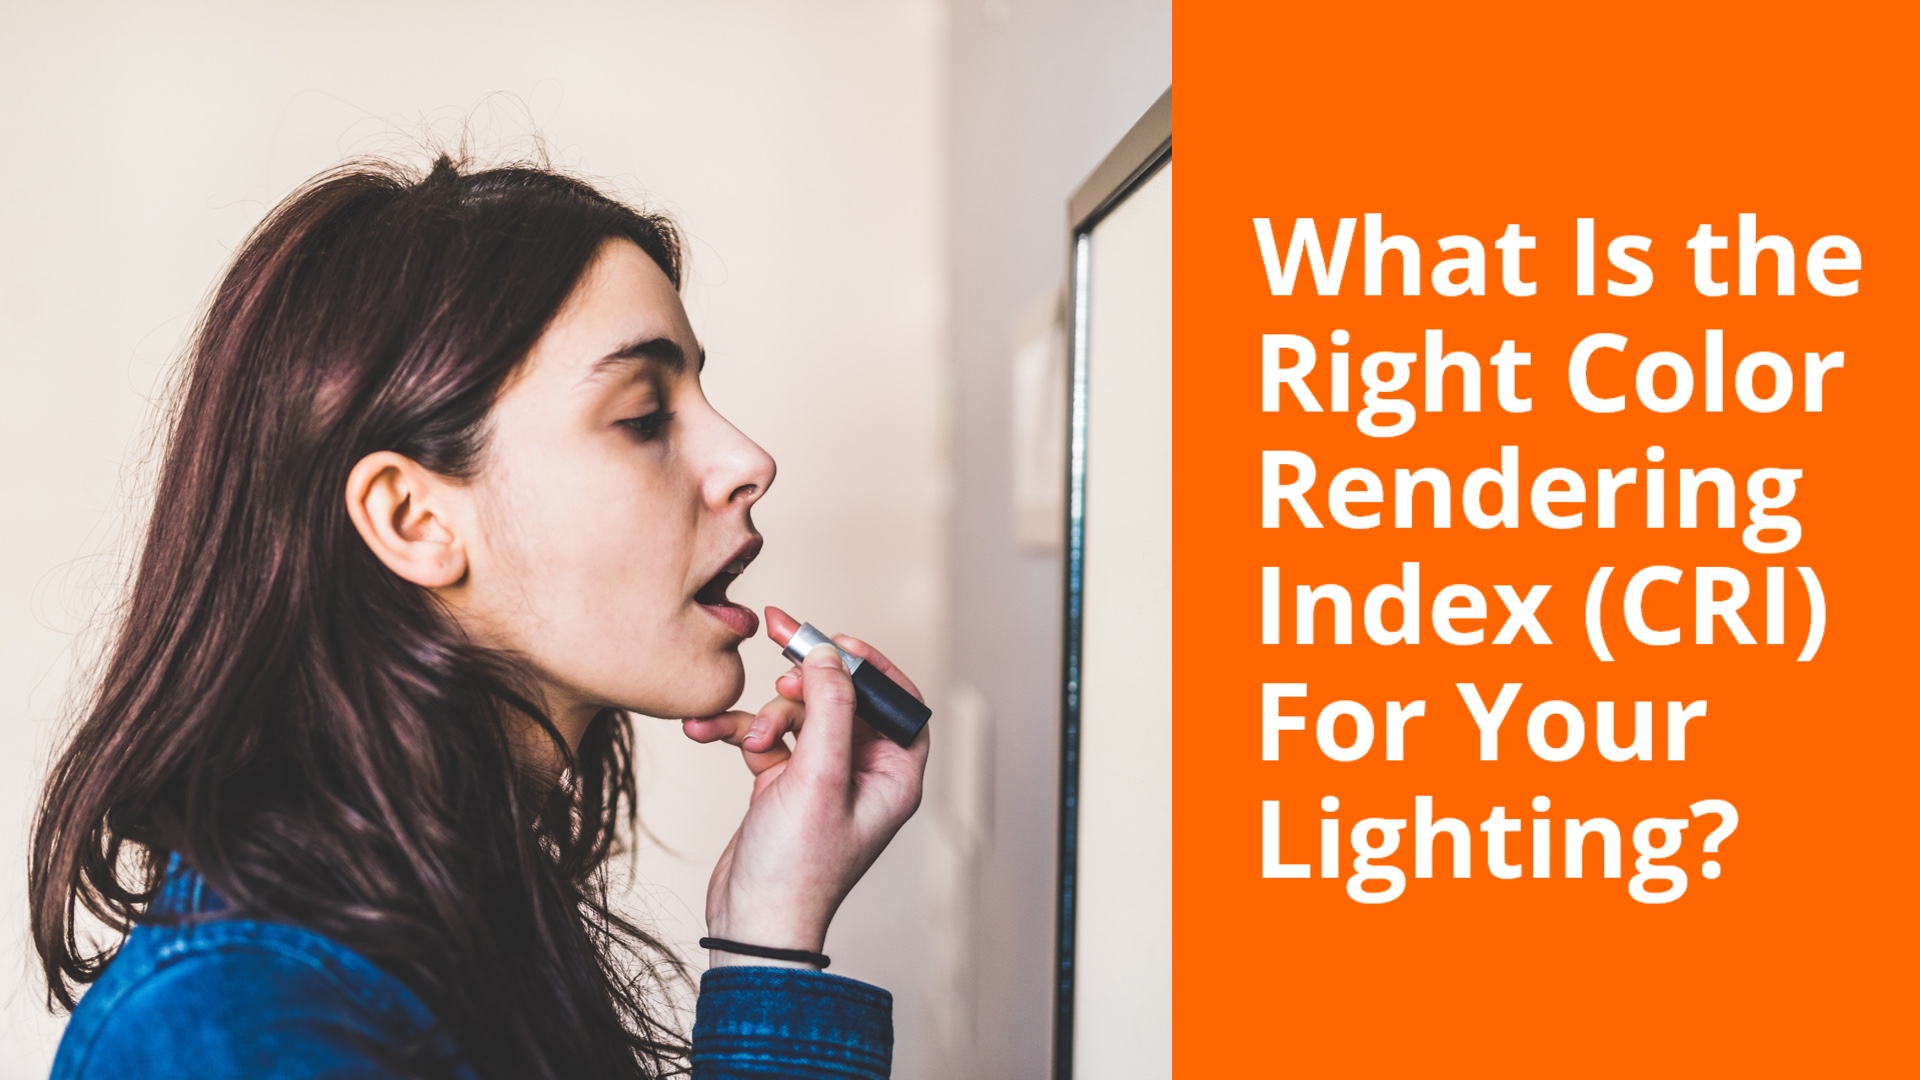 What Is The Right Color Rendering Index (CRI) For Your Lighting